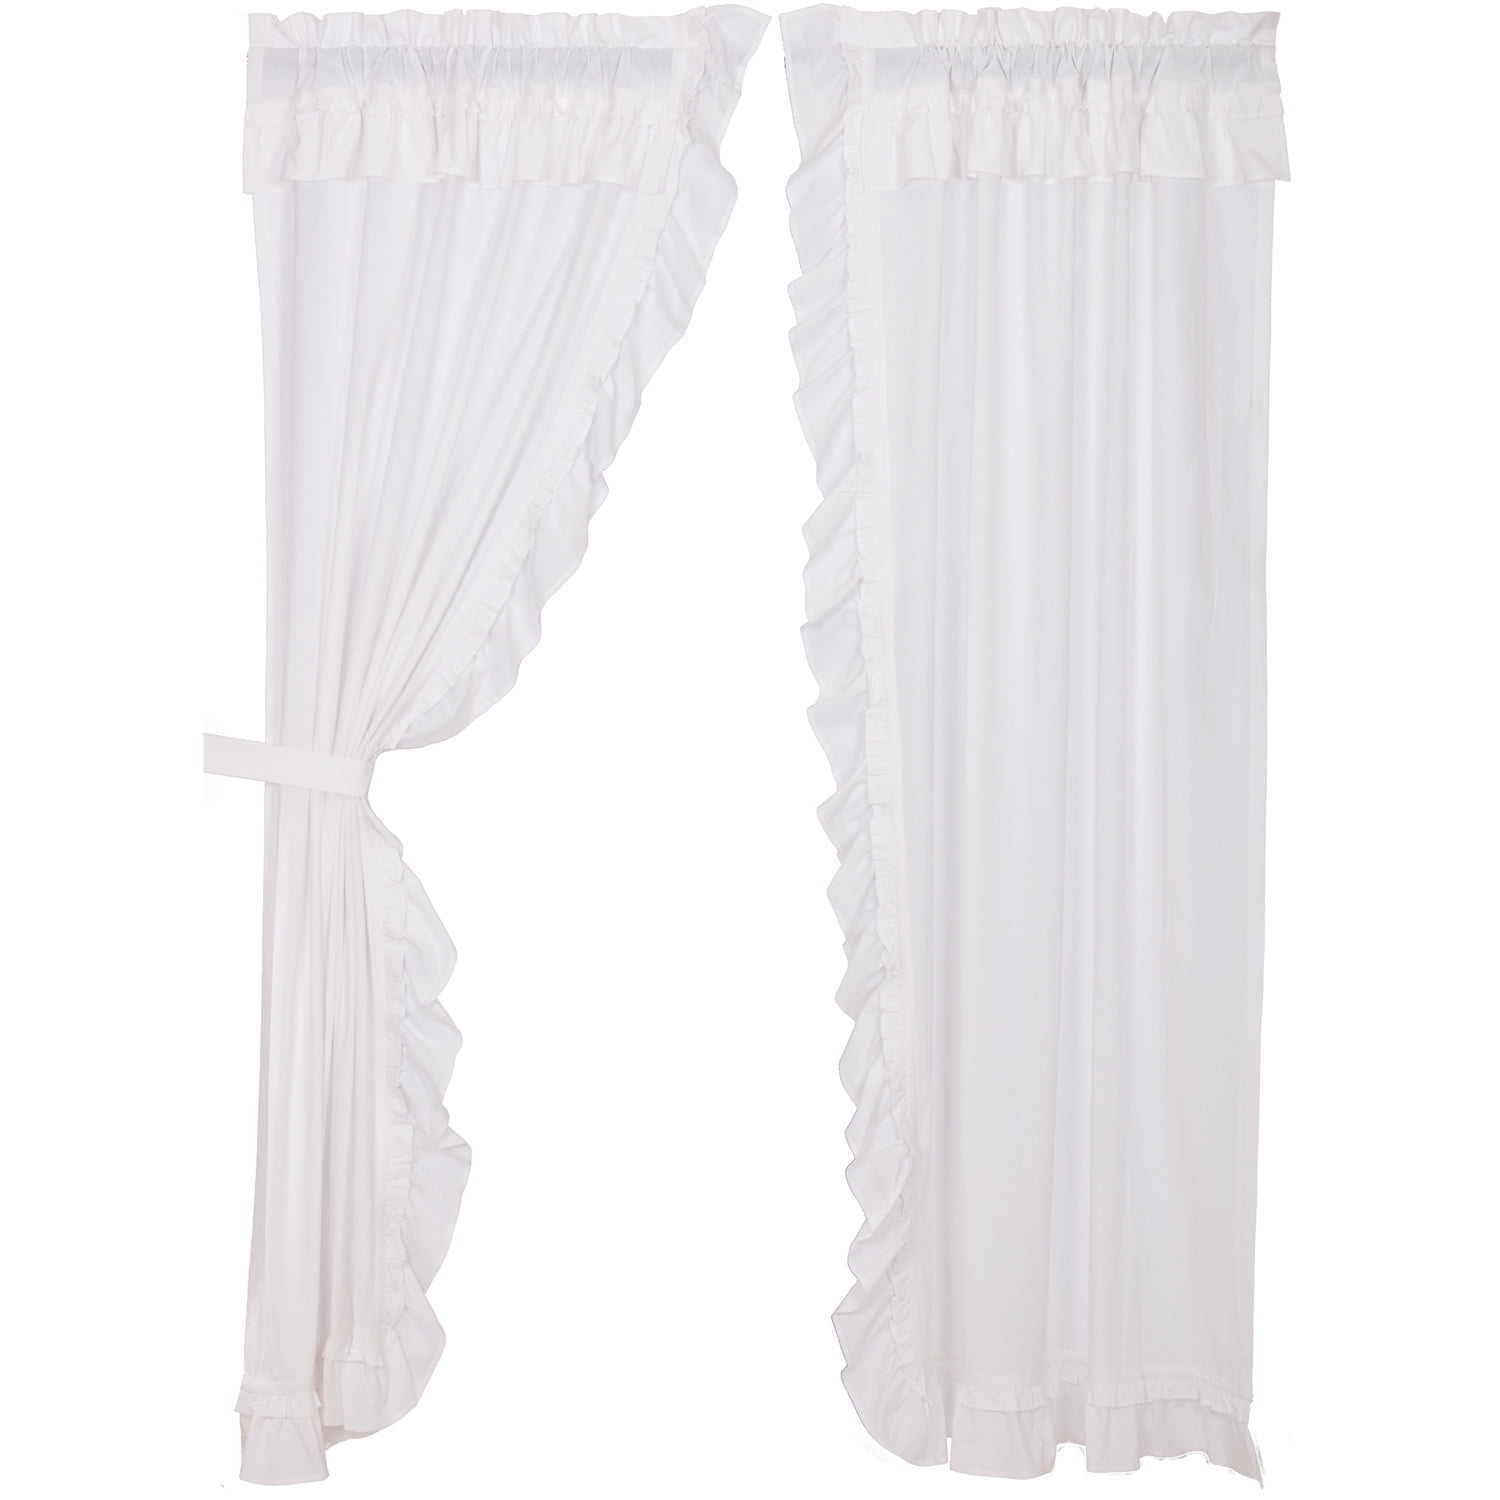 Photo 1 of VHC Brand Muslin Ruffled Bleached White Set Of 2 Panel 51379 NEW